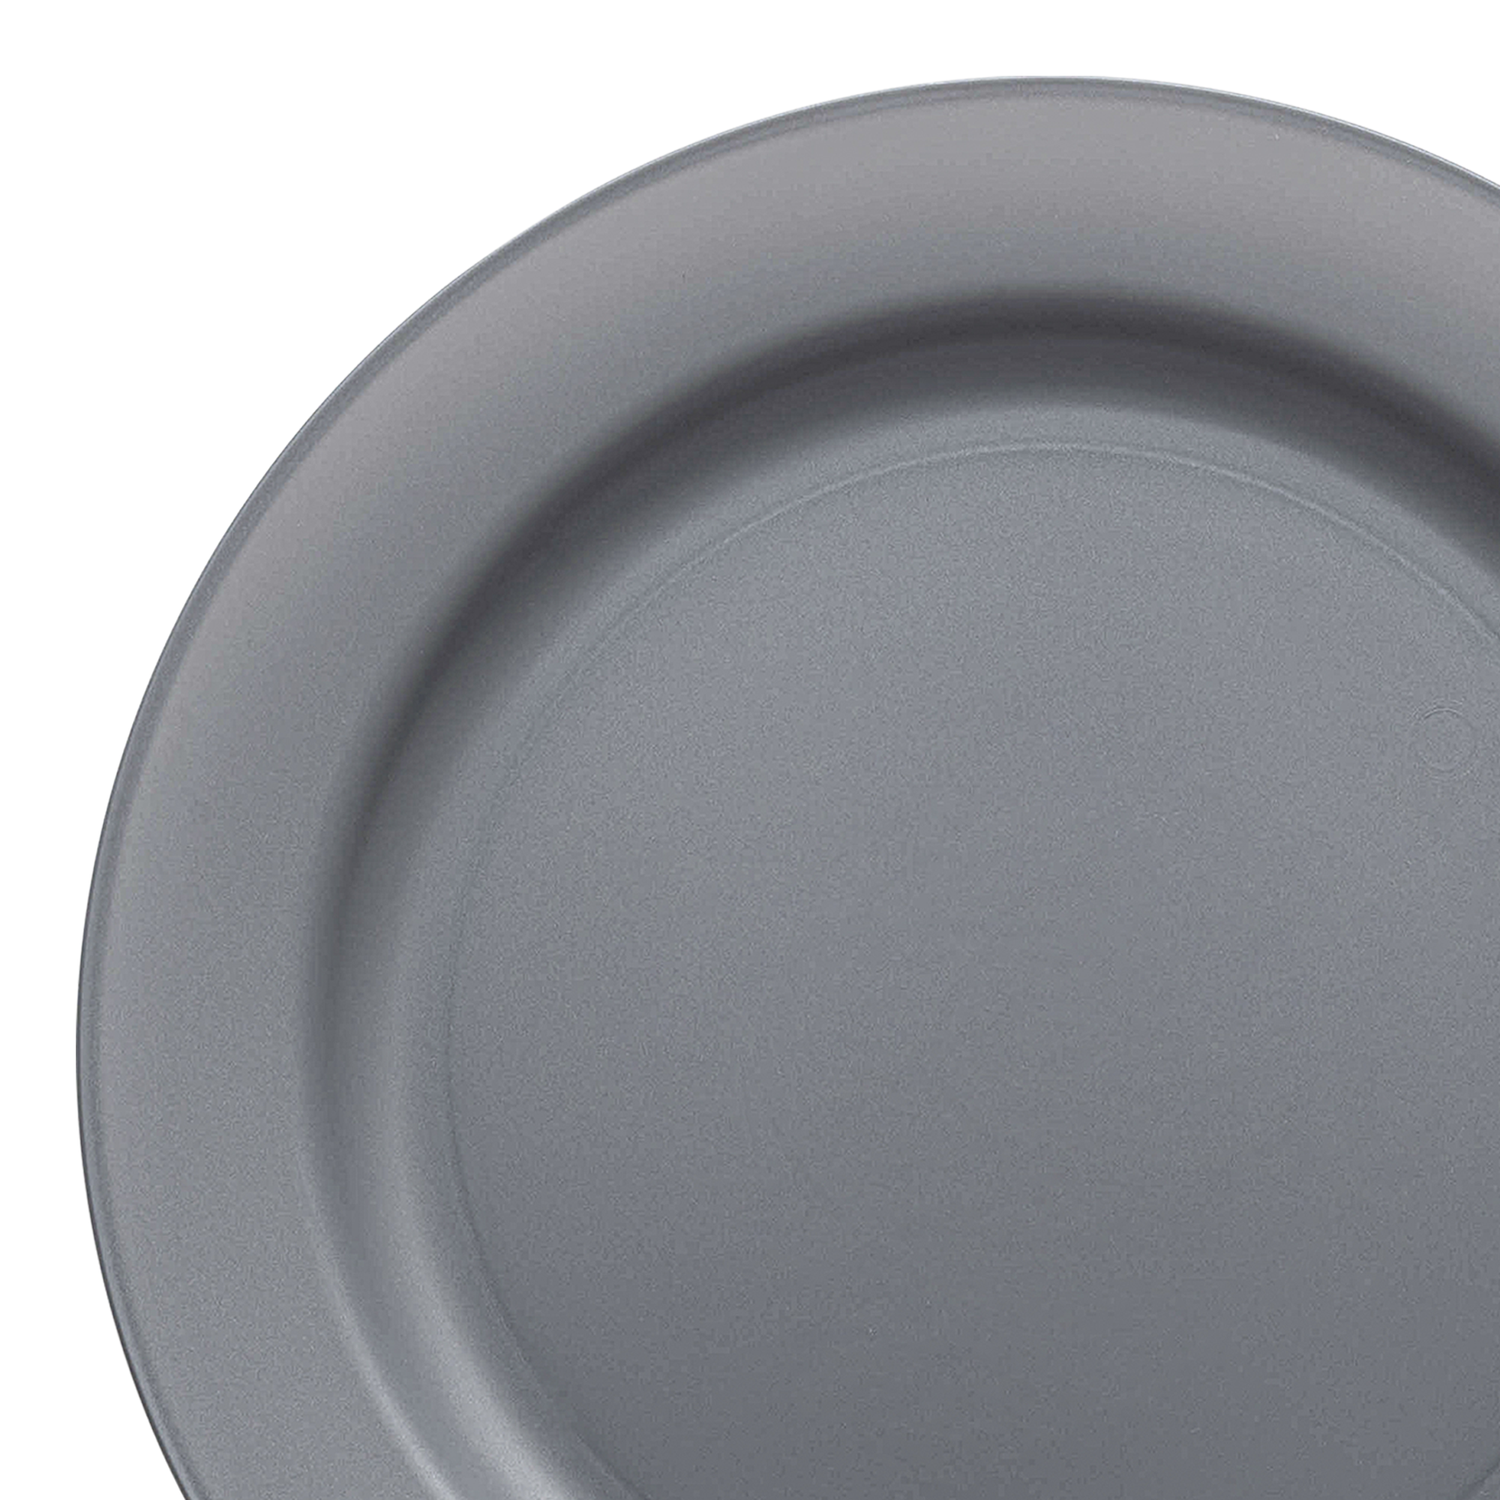 Matte Steel Gray Round Disposable Plastic Dinner Plates (10") | The Kaya Collection